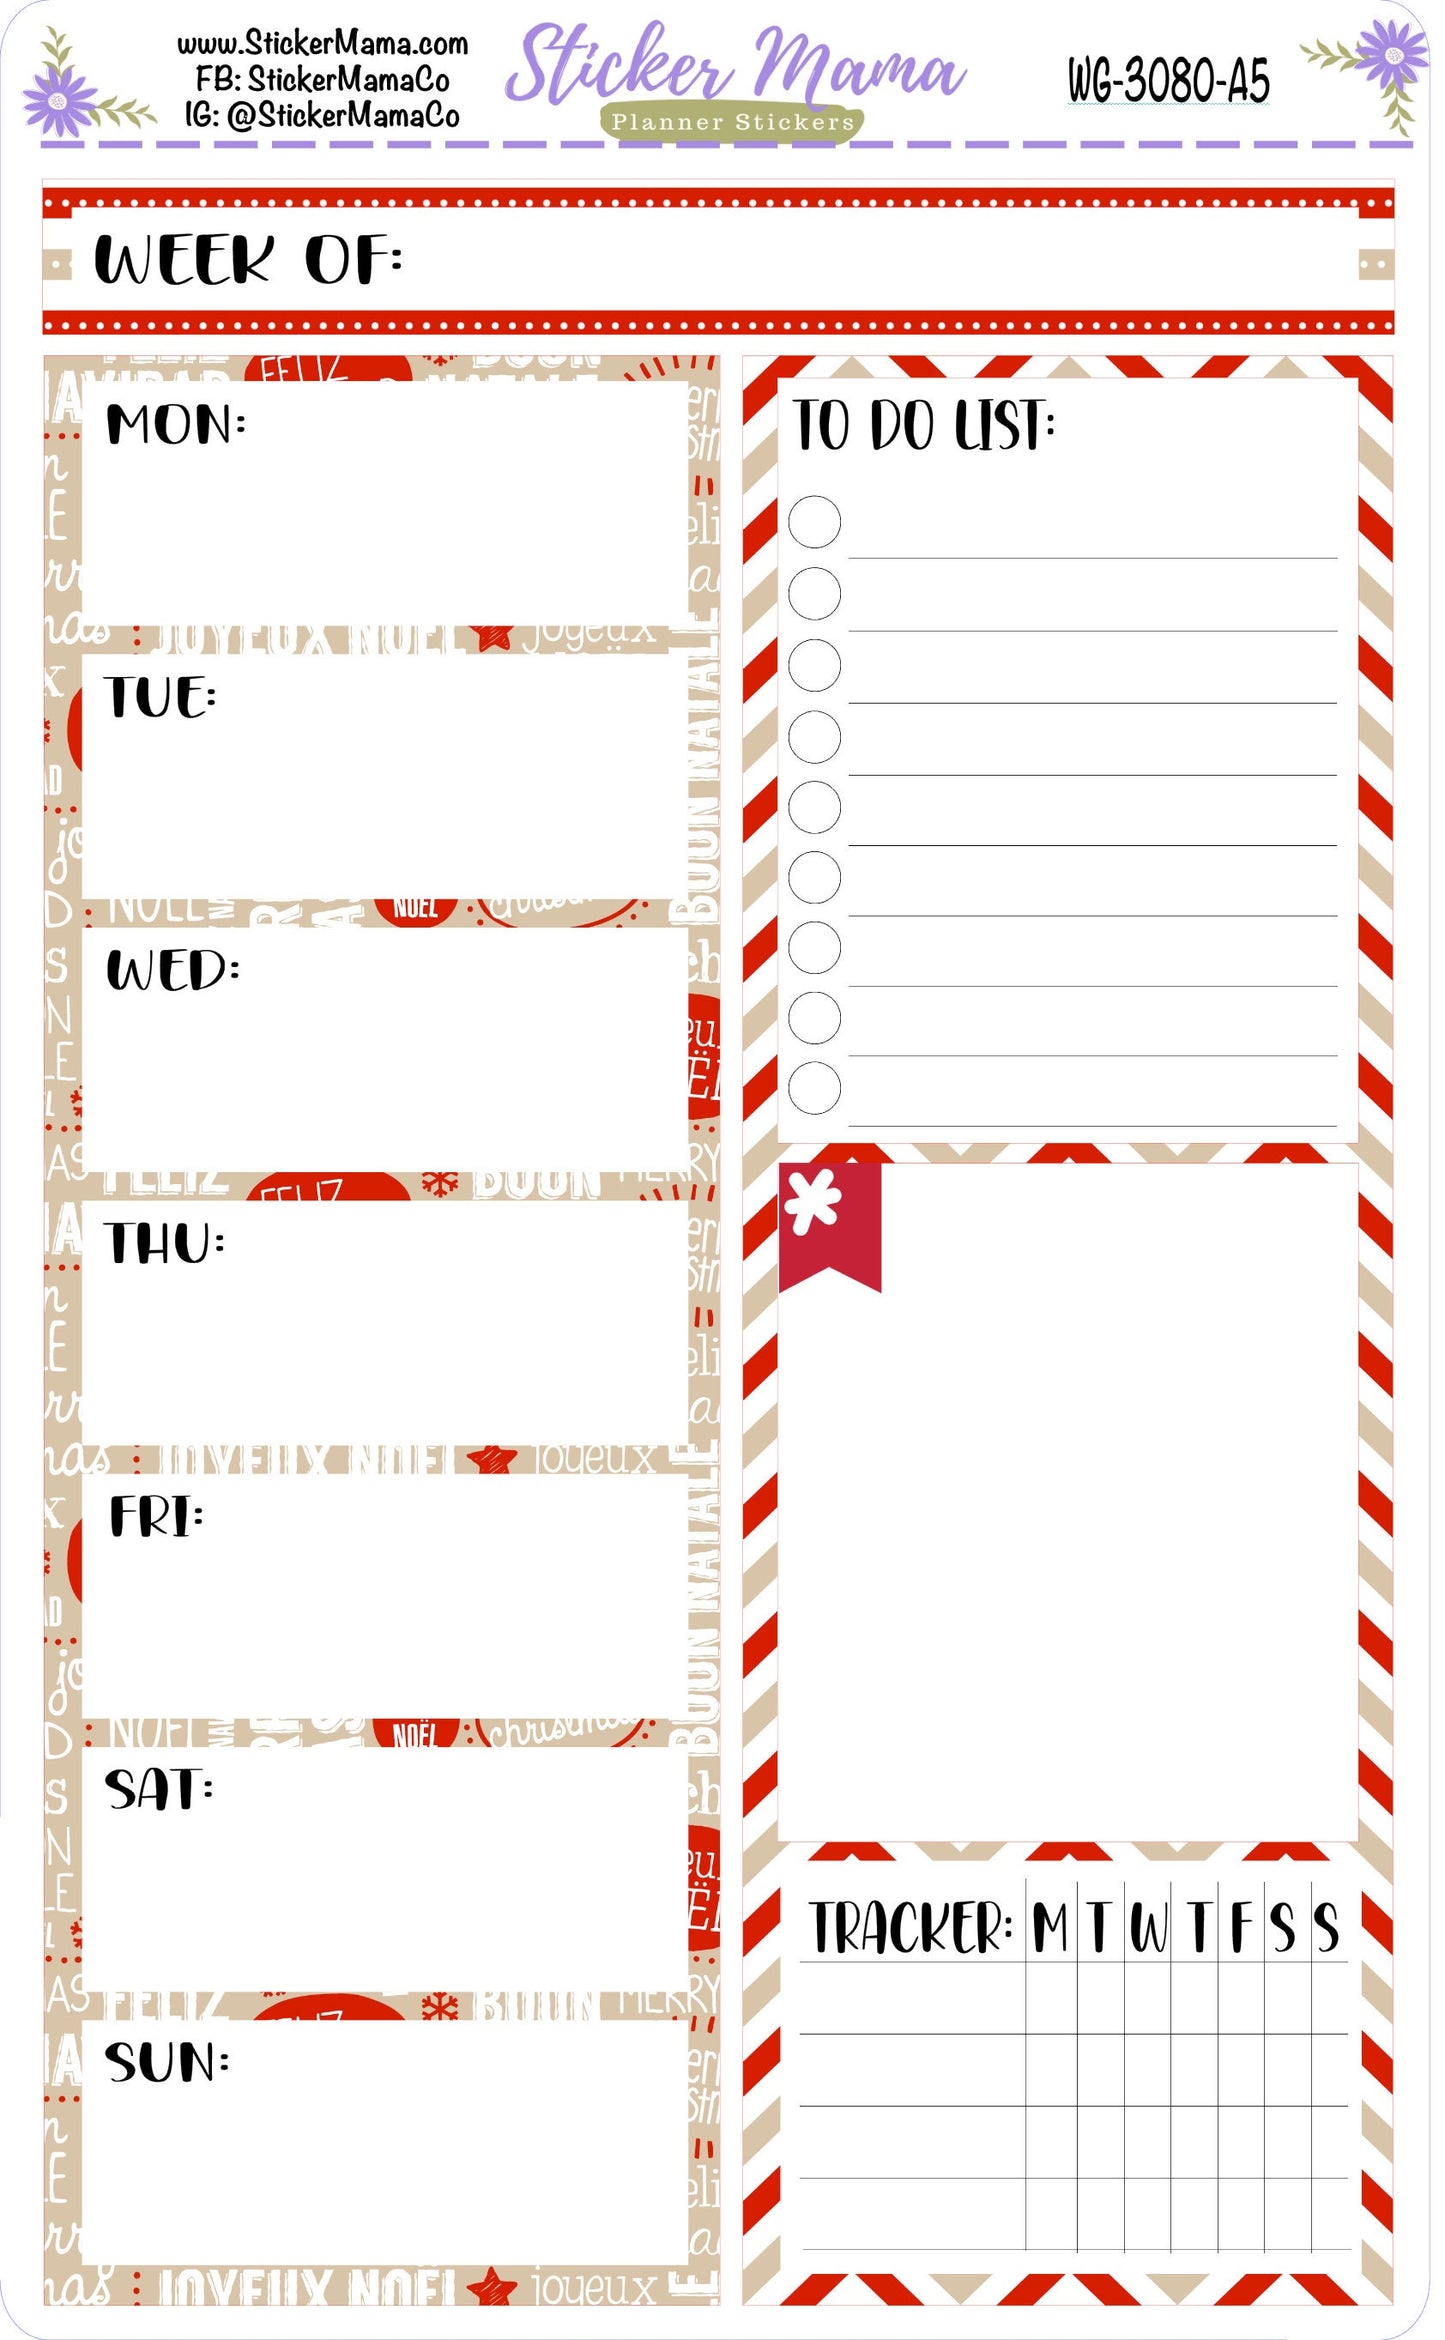 WG-3080 - WEEK at a GLANCE - Traditional Christmas - weekly glance 7x9 or a5